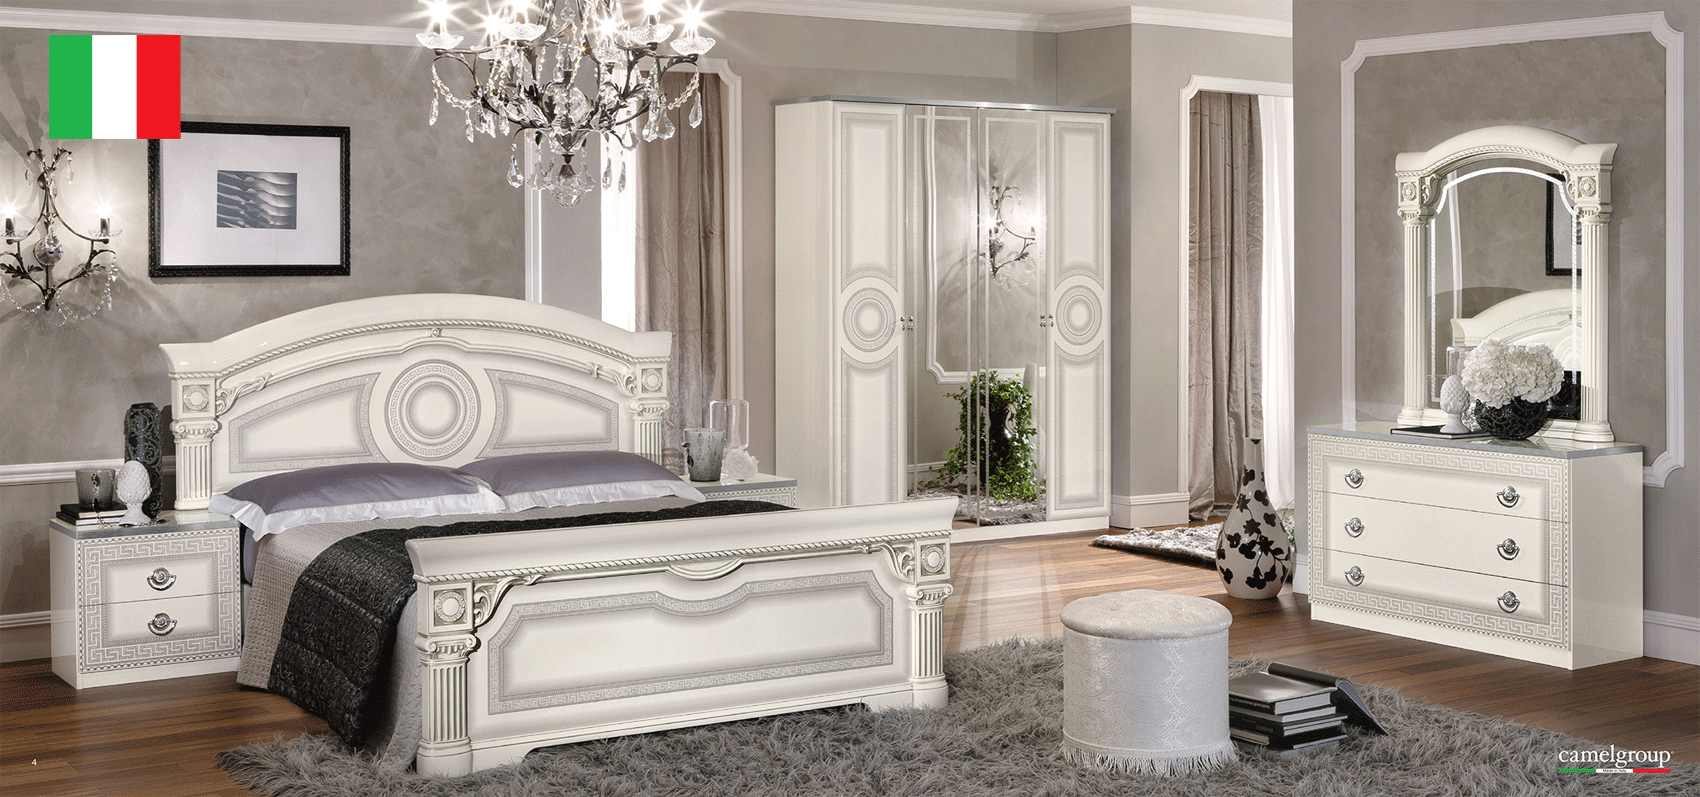 Bedroom Furniture Modern Bedrooms QS and KS Aida Bedroom, White w/Silver, Camelgroup Italy